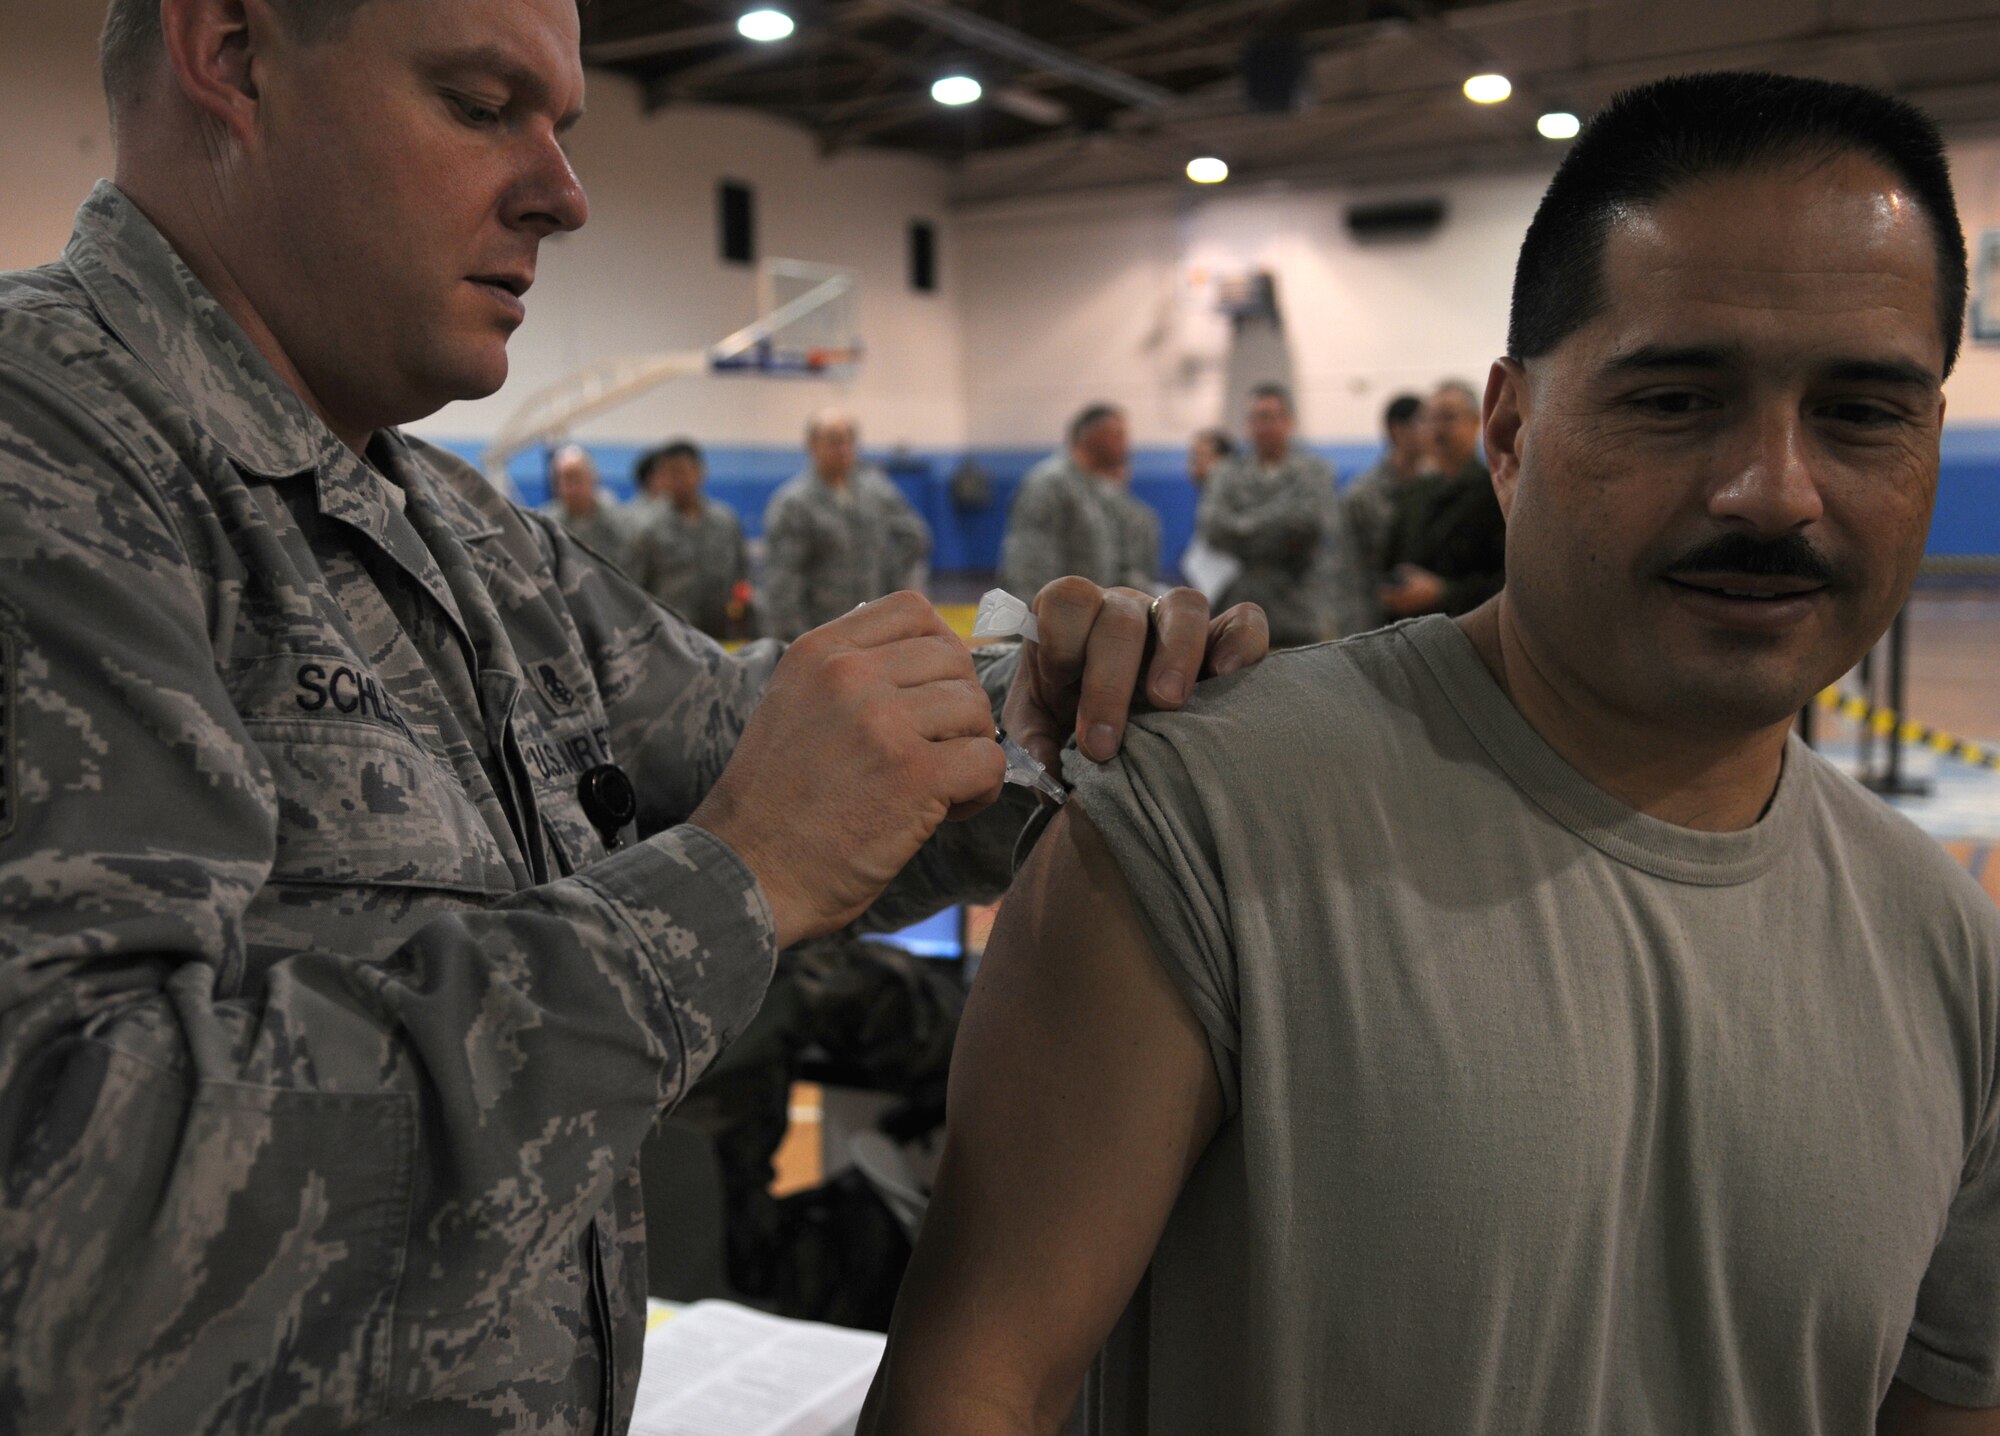 U.S. Air Force Master Sgt. Joseph Schleper, 86th Medical Operations Squadron medical technician, administers the H1N1 vaccine to Chief Master Sgt. Paul Clark, 86th Mission Support Group superintendent, at the Southside Gym Annex Ramstein Air Base, Germany, Nov. 17, 2009. The H1N1 vaccine is being given to military members and their families to help fight against influenza around the Kaiserslautern Military Community. (U.S. Air Force photo by Airman 1st Class Caleb Pierce)